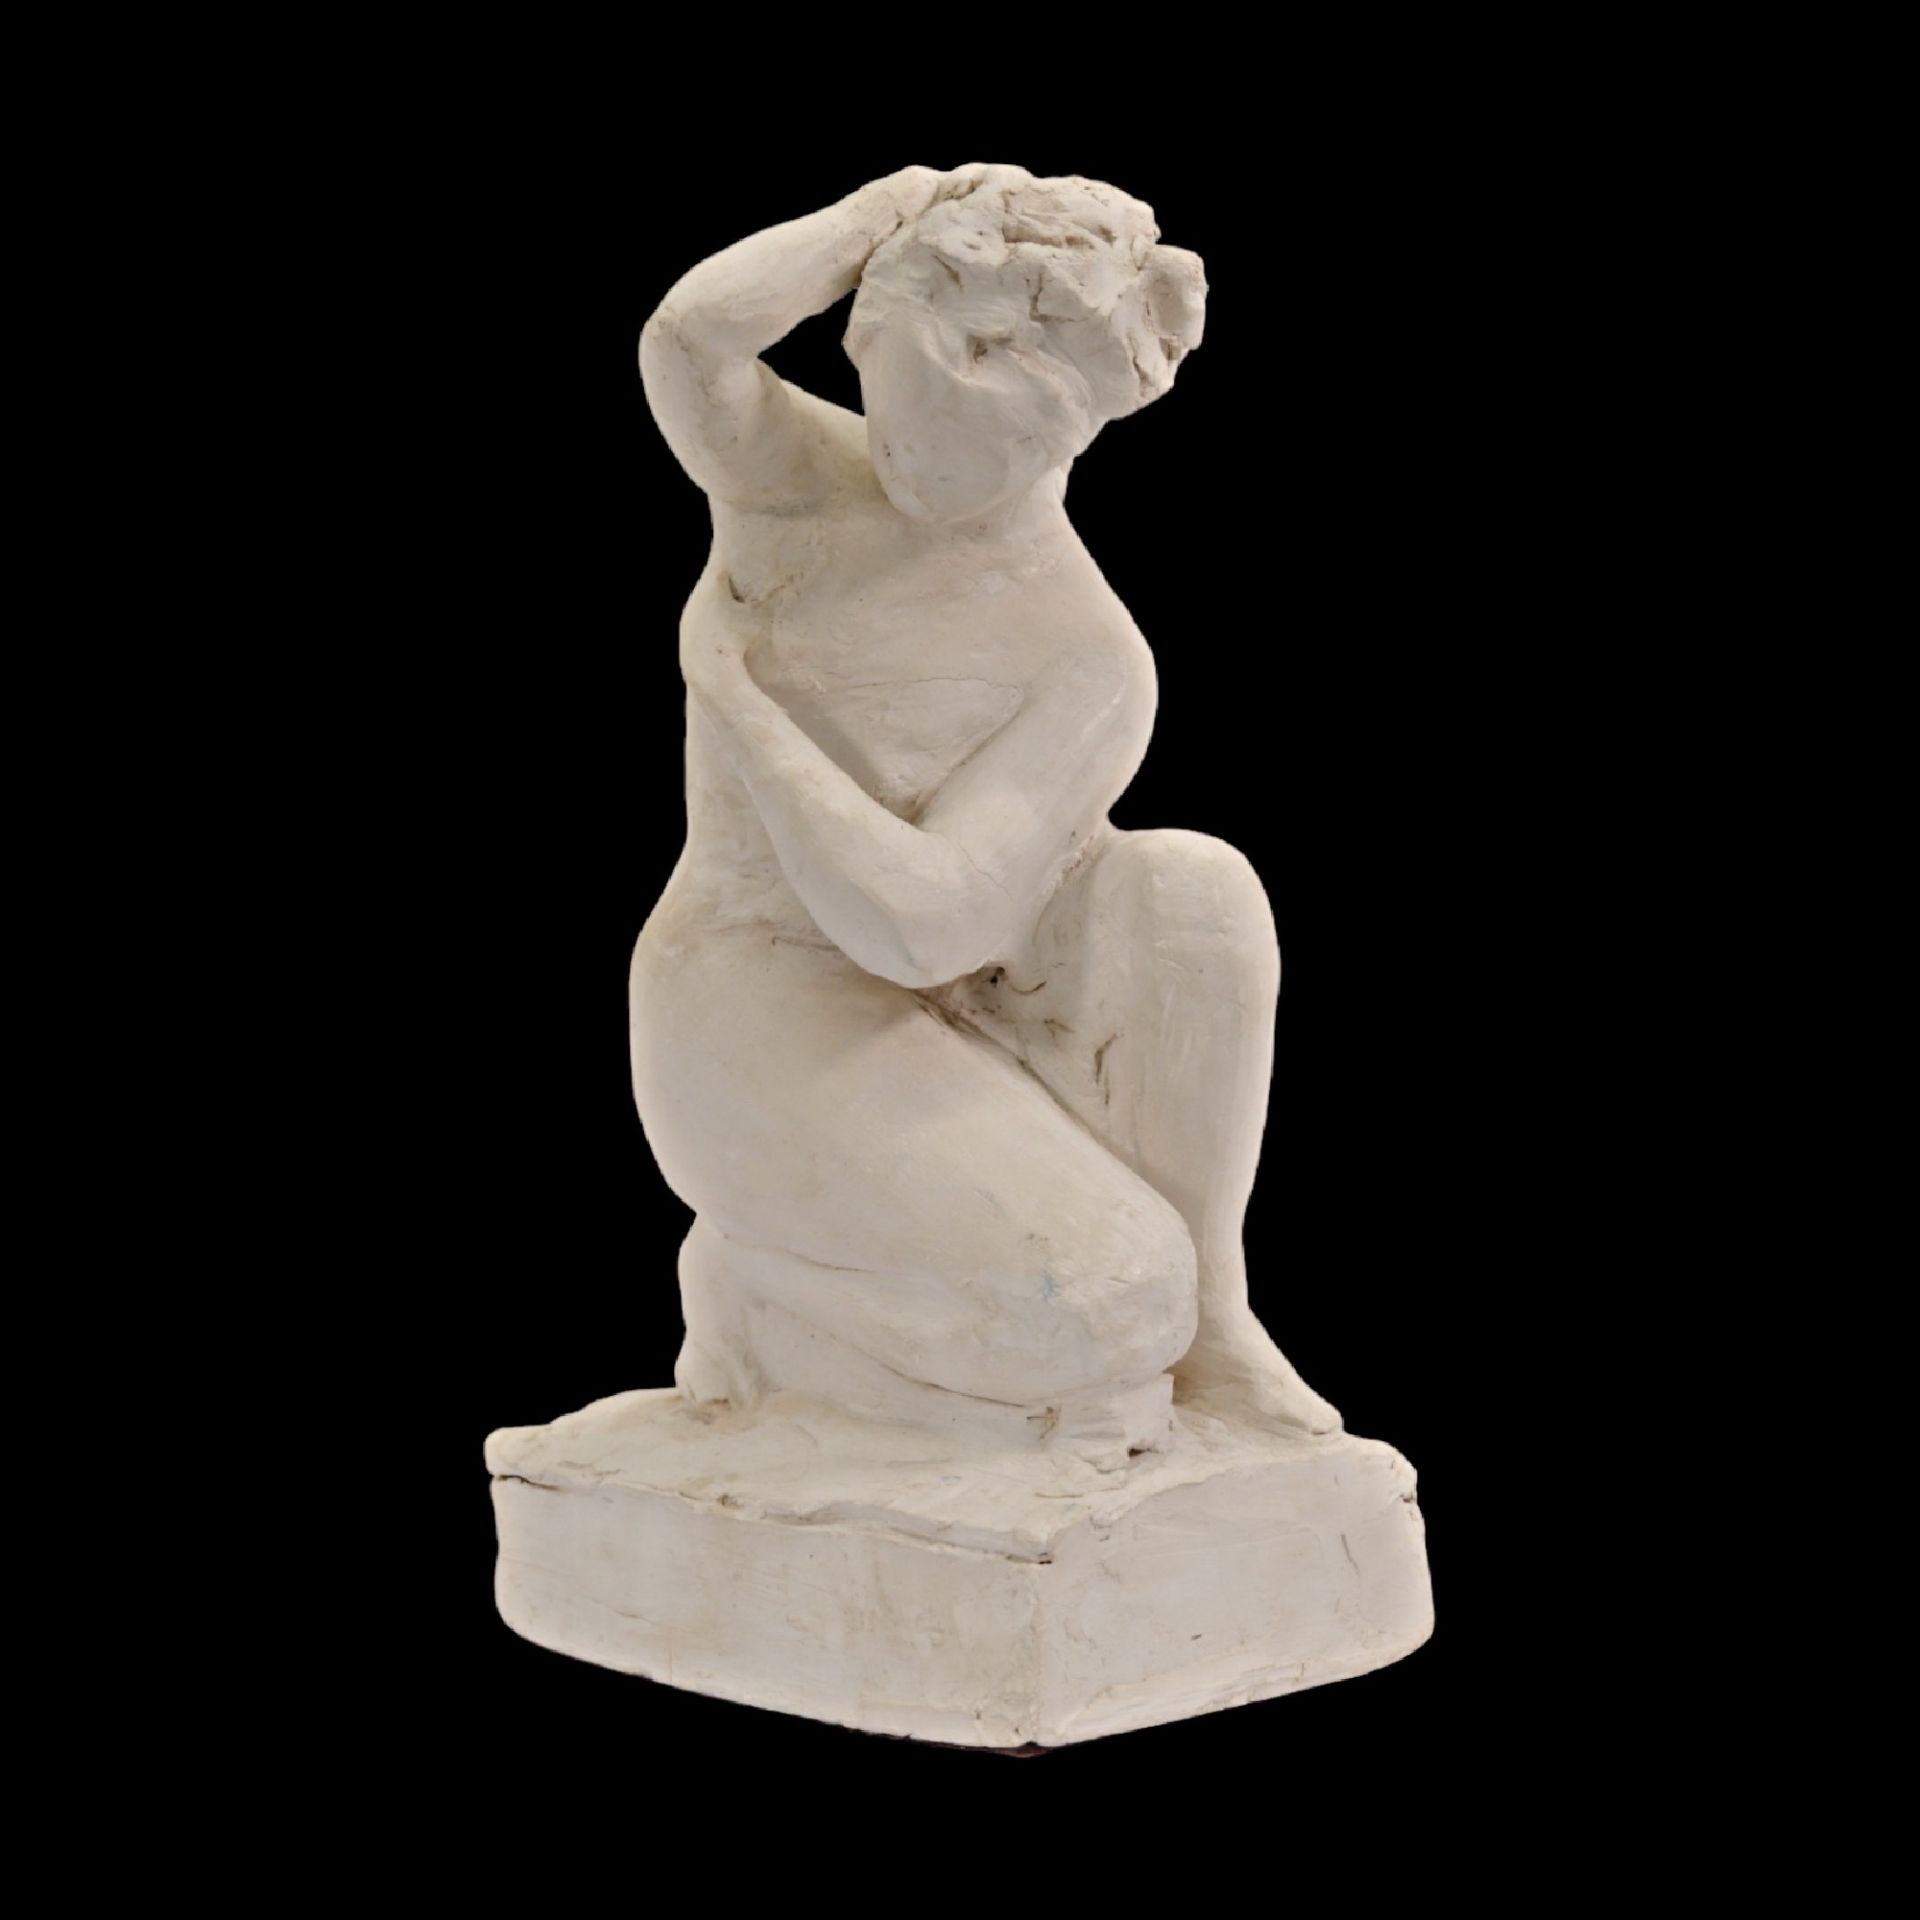 Terracotta sculpture "Young Woman", unsigned, France, 19th century. Collectibles and home decor.